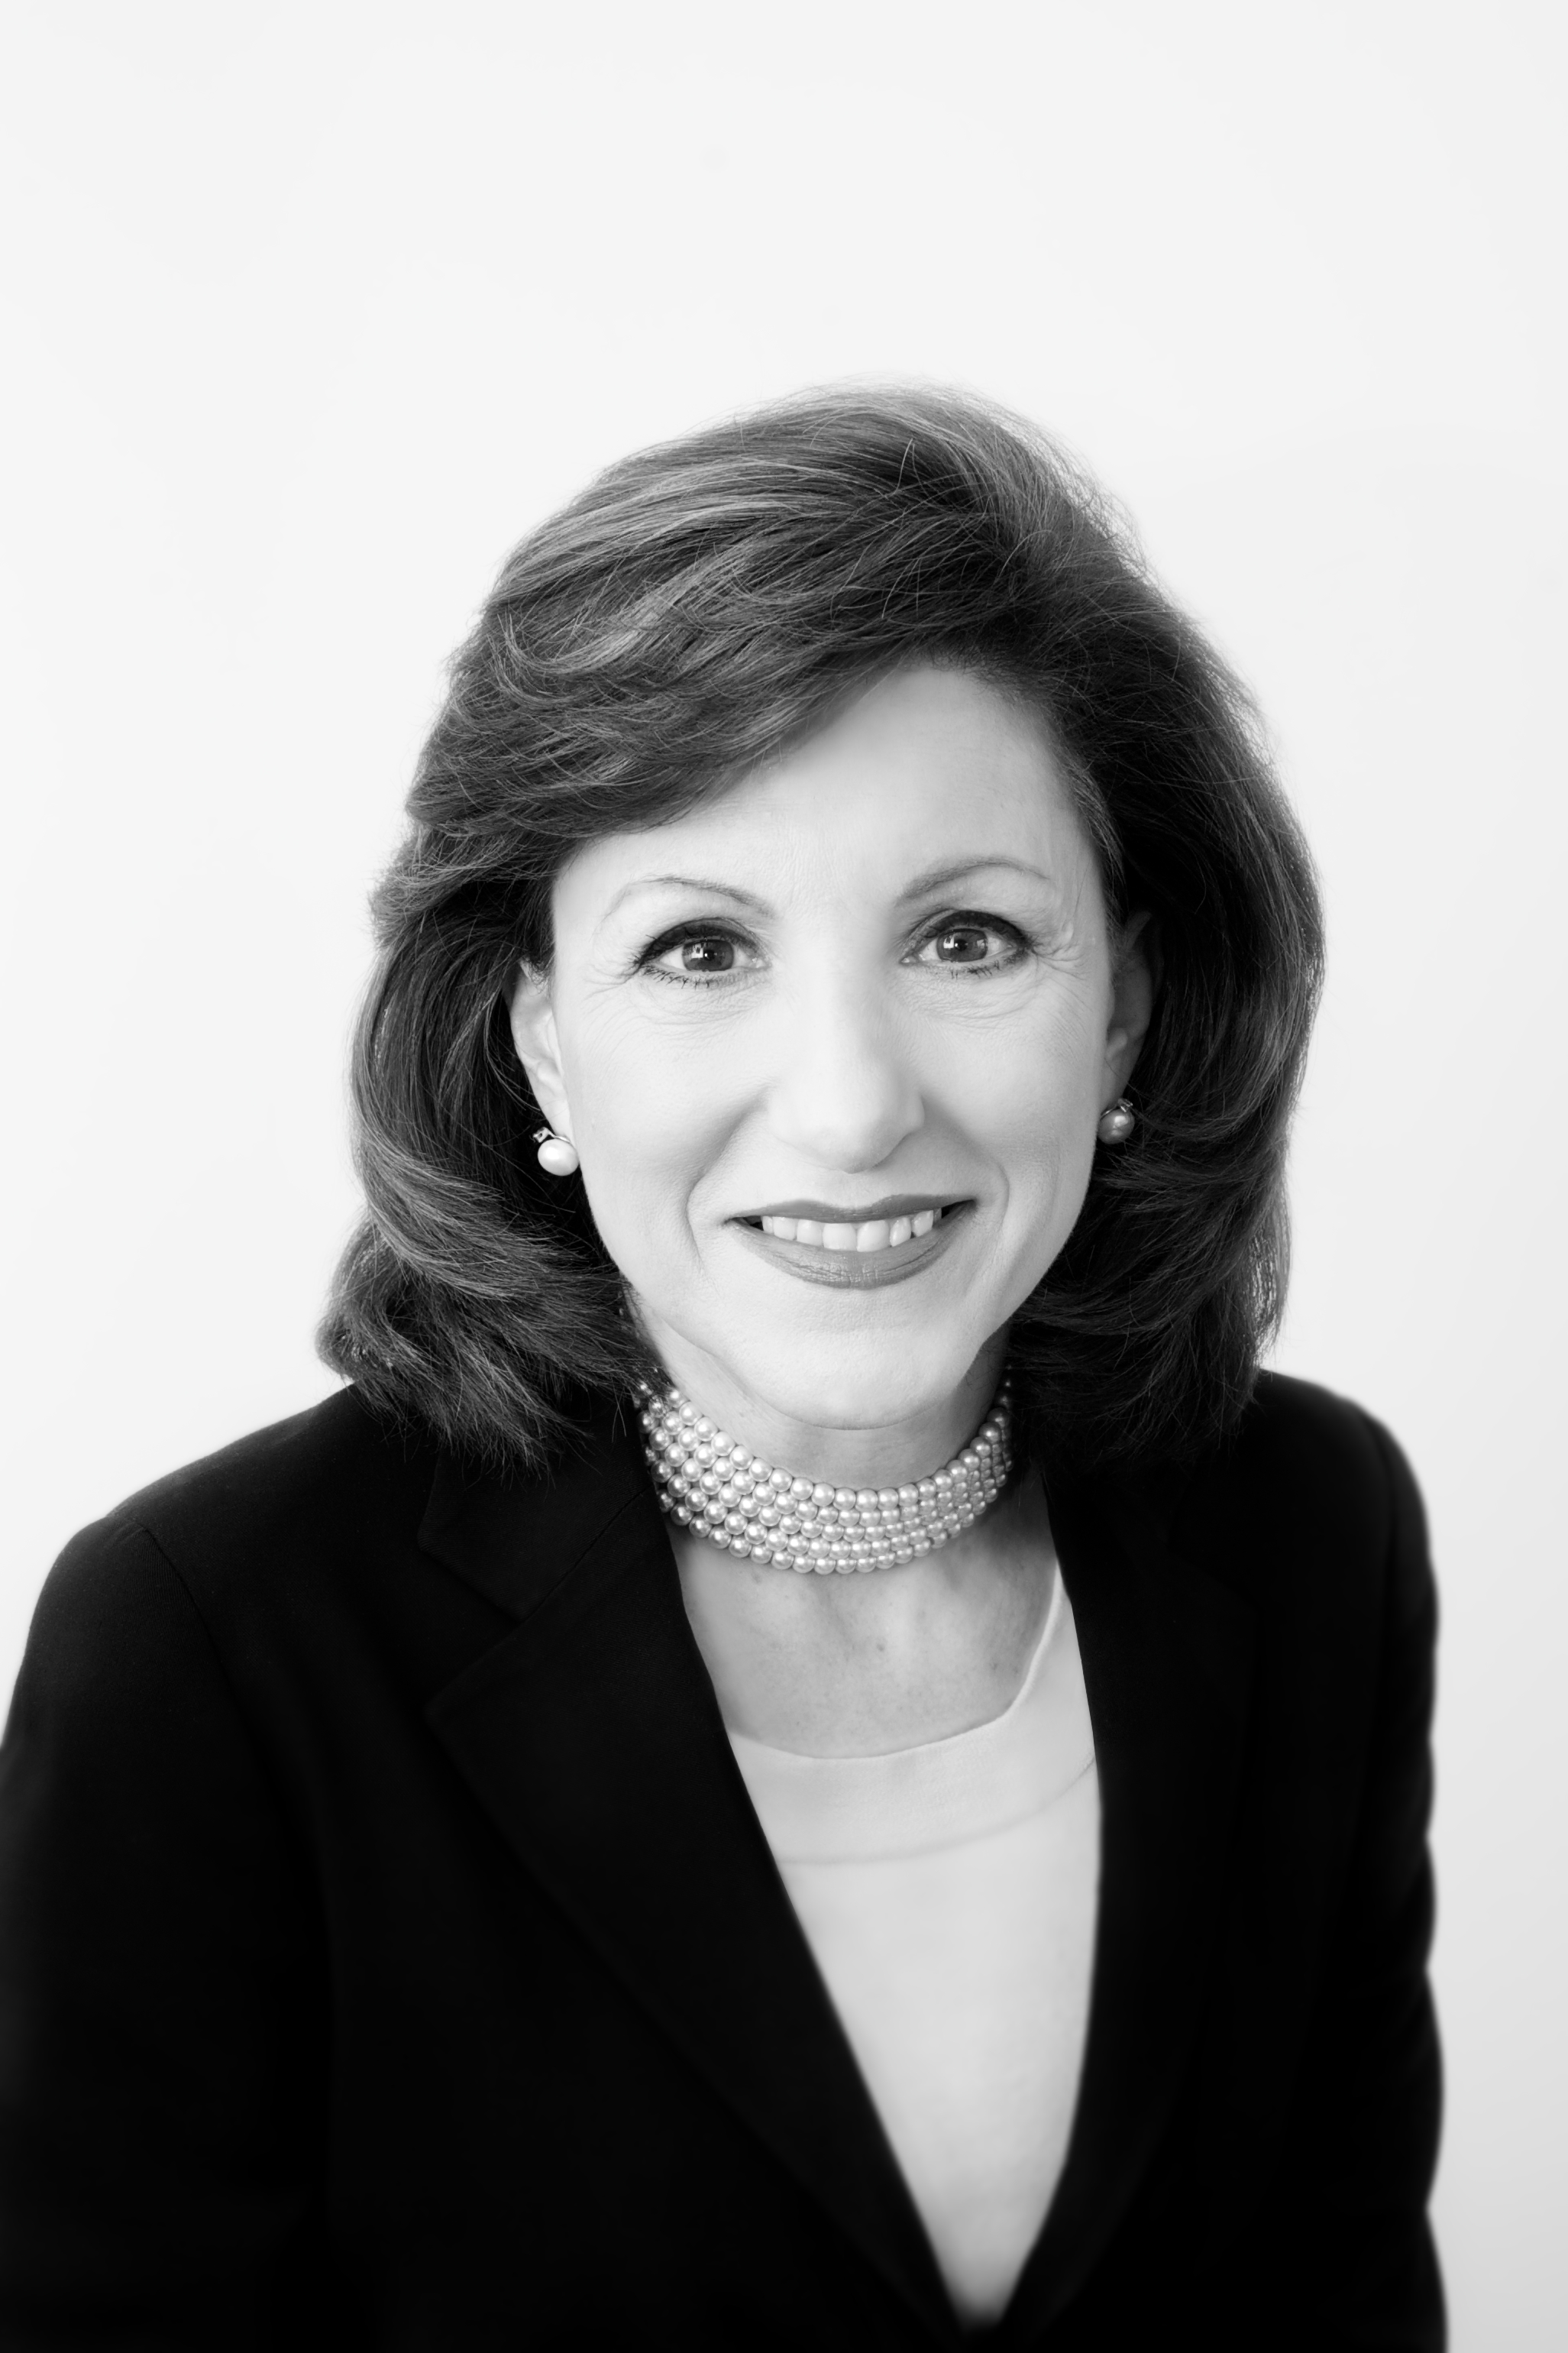 Lisa Pollina, vice chairman of RBC Capital Markets, has been named to the board of the Bob Woodruff Foundation.